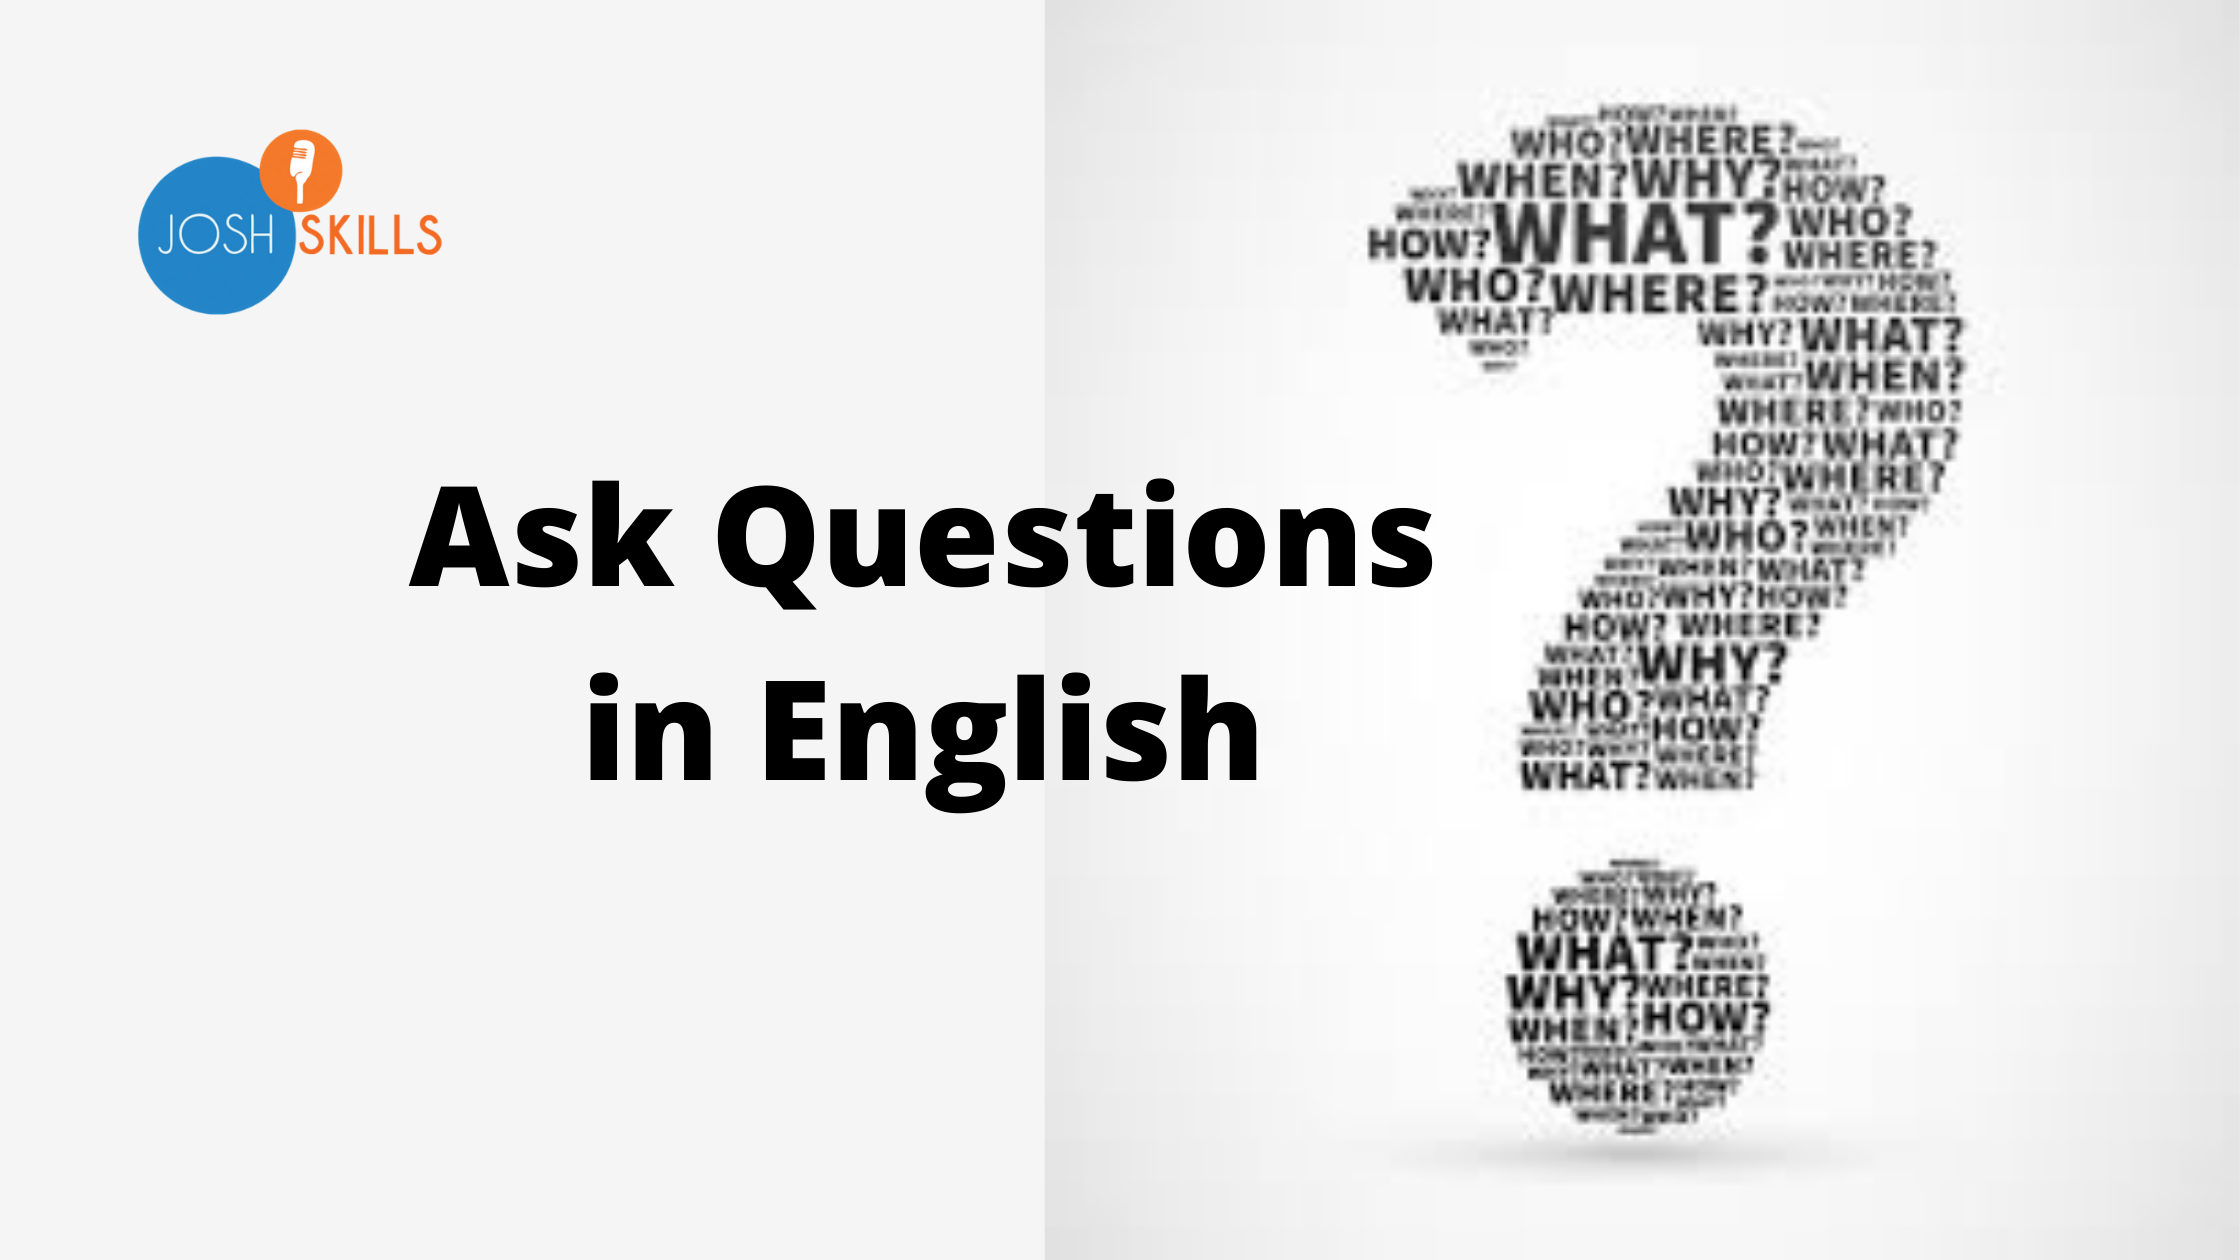 English mai Questions Kaise Puche: A Guide to Ask Questions in English -  Josh कोश